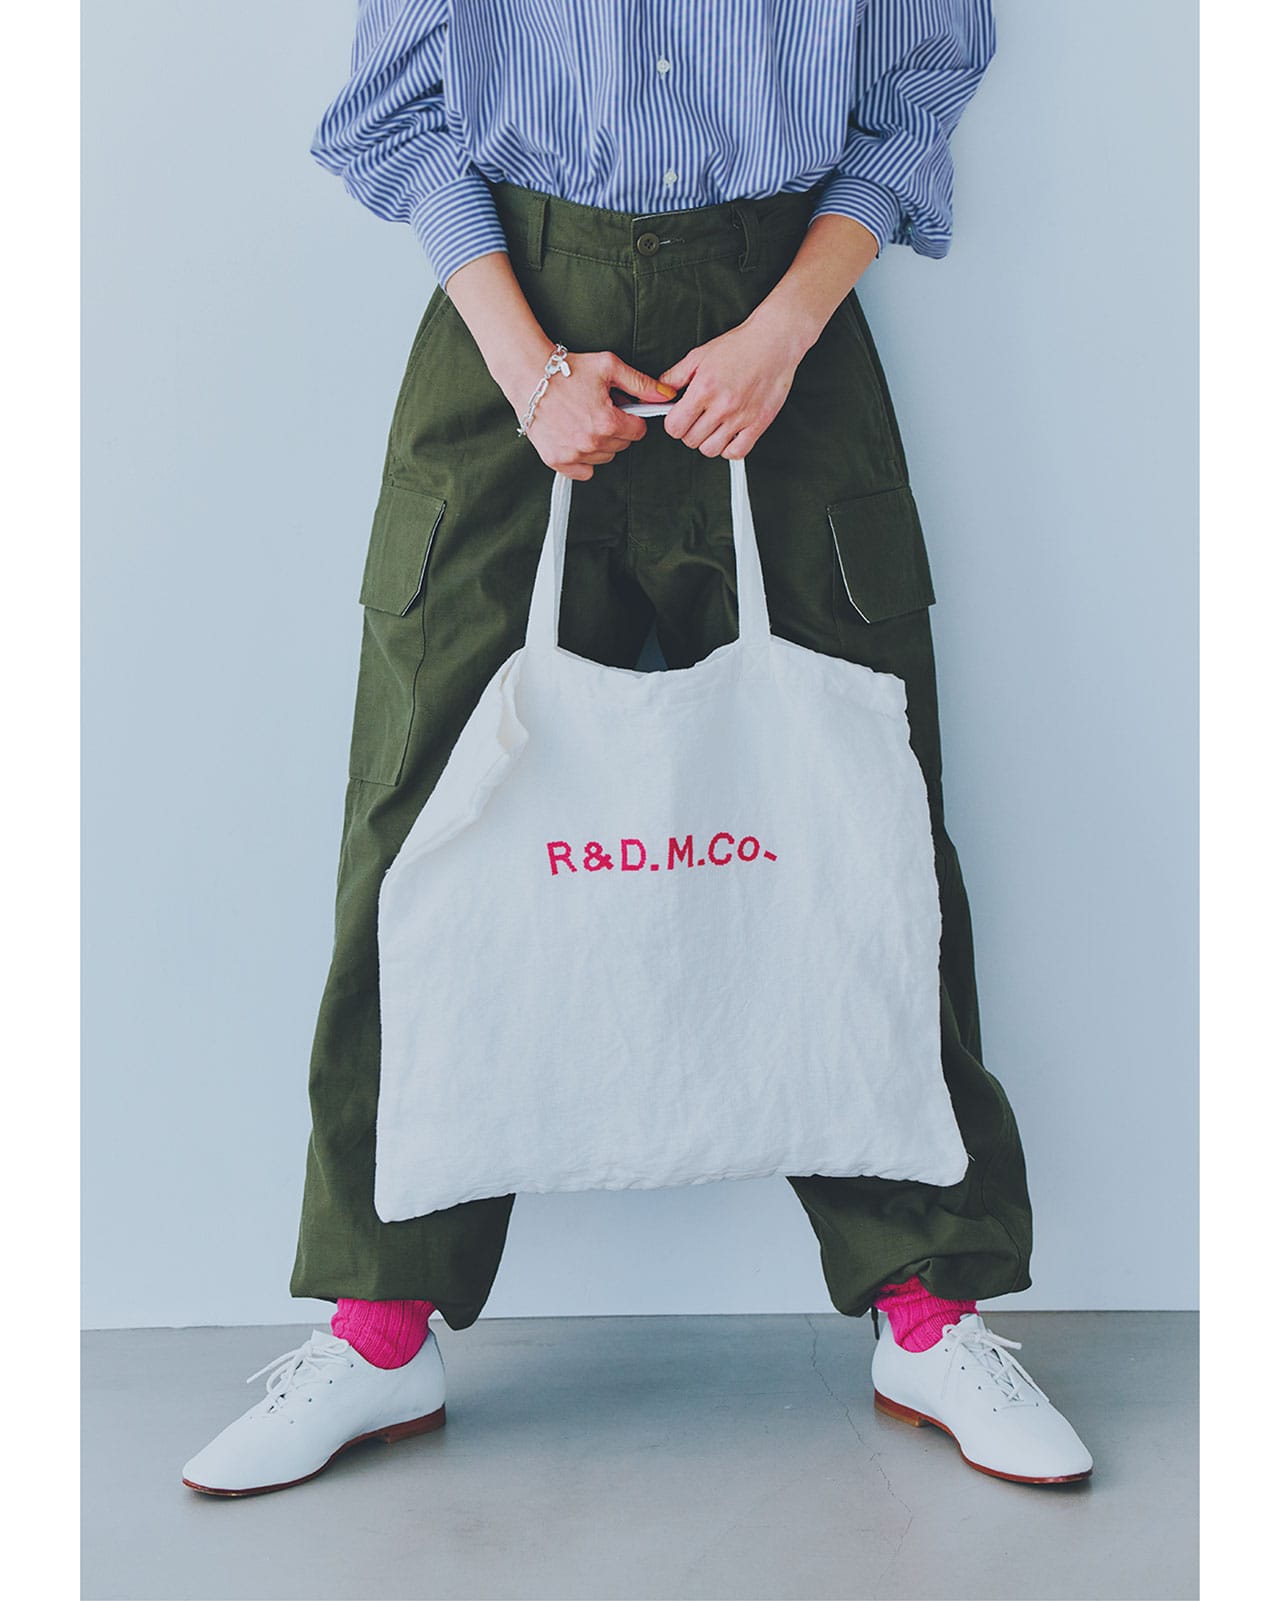 R＆D.M.Co-（アールアンドディーエムコー）　R＆D.M.Co- EMBROIDERY TOTE BAG